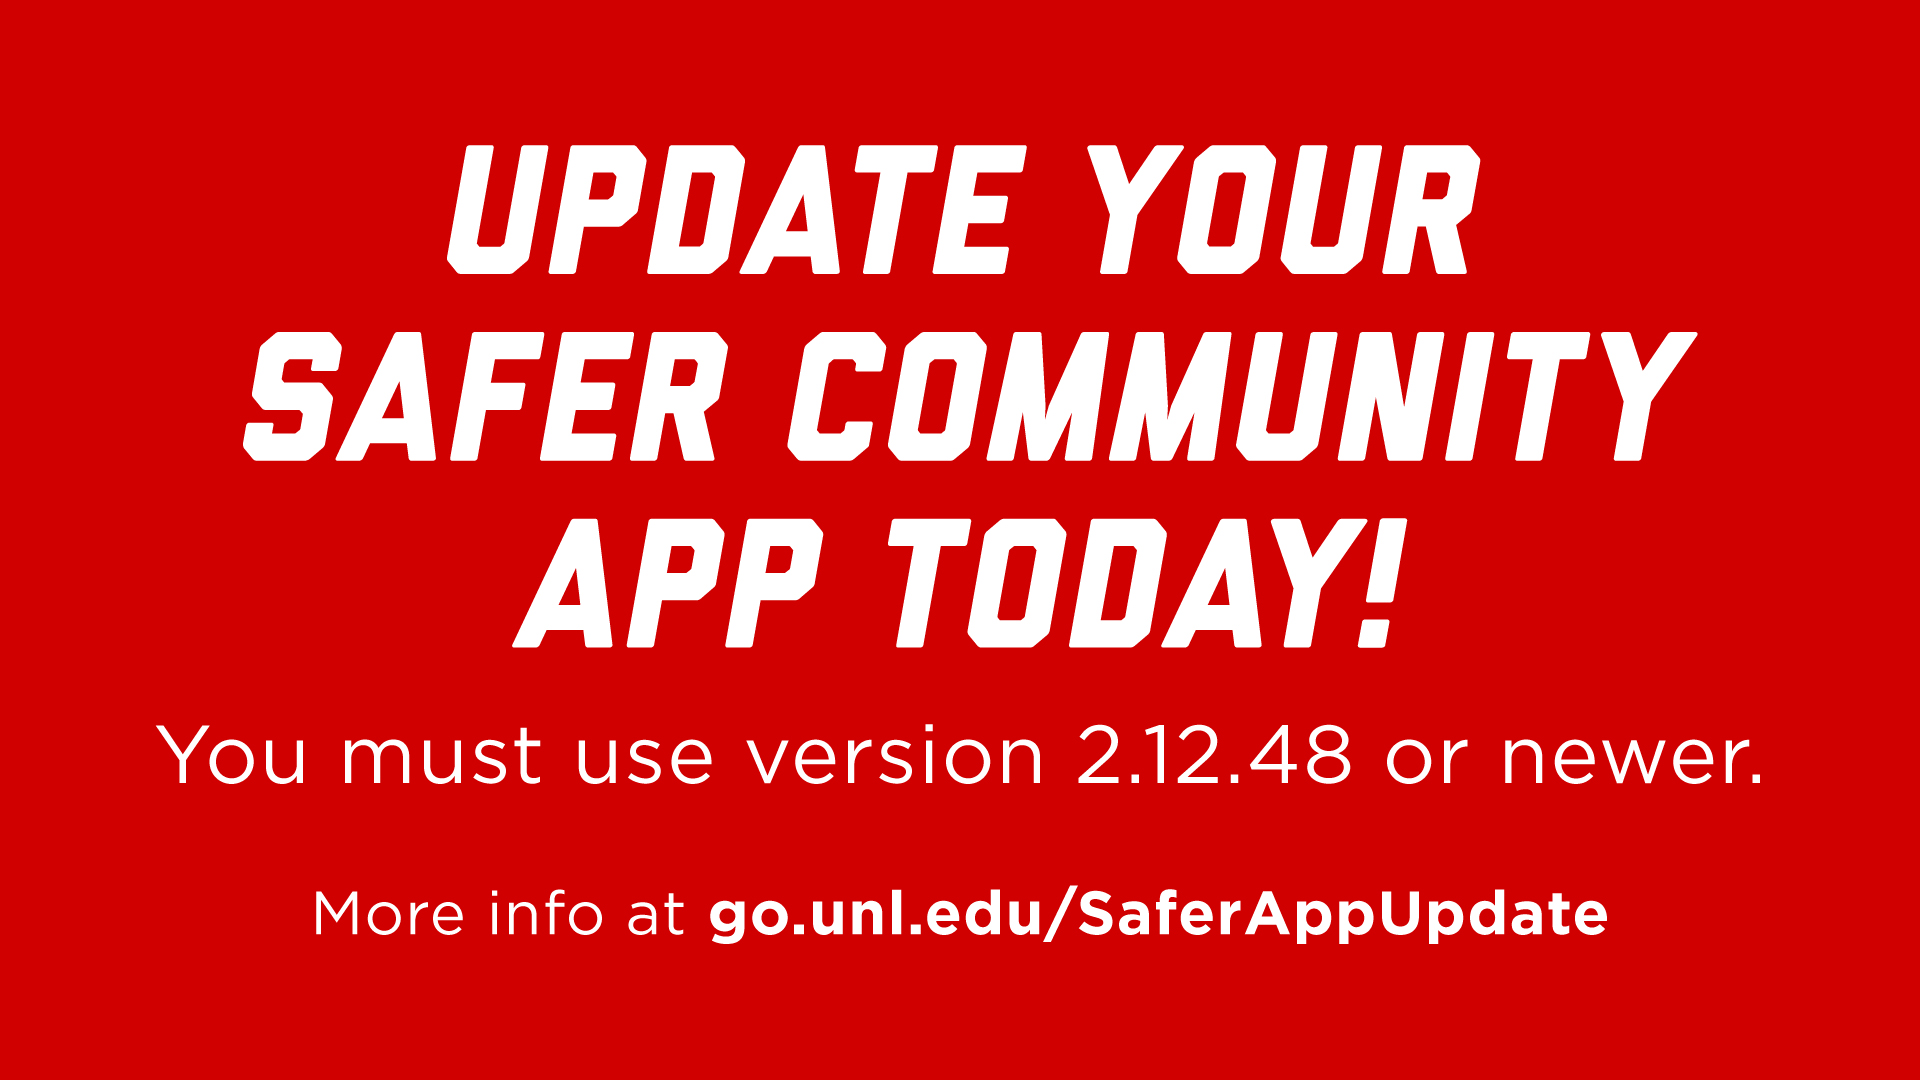 Update your Safer Community app if you haven't already done so.